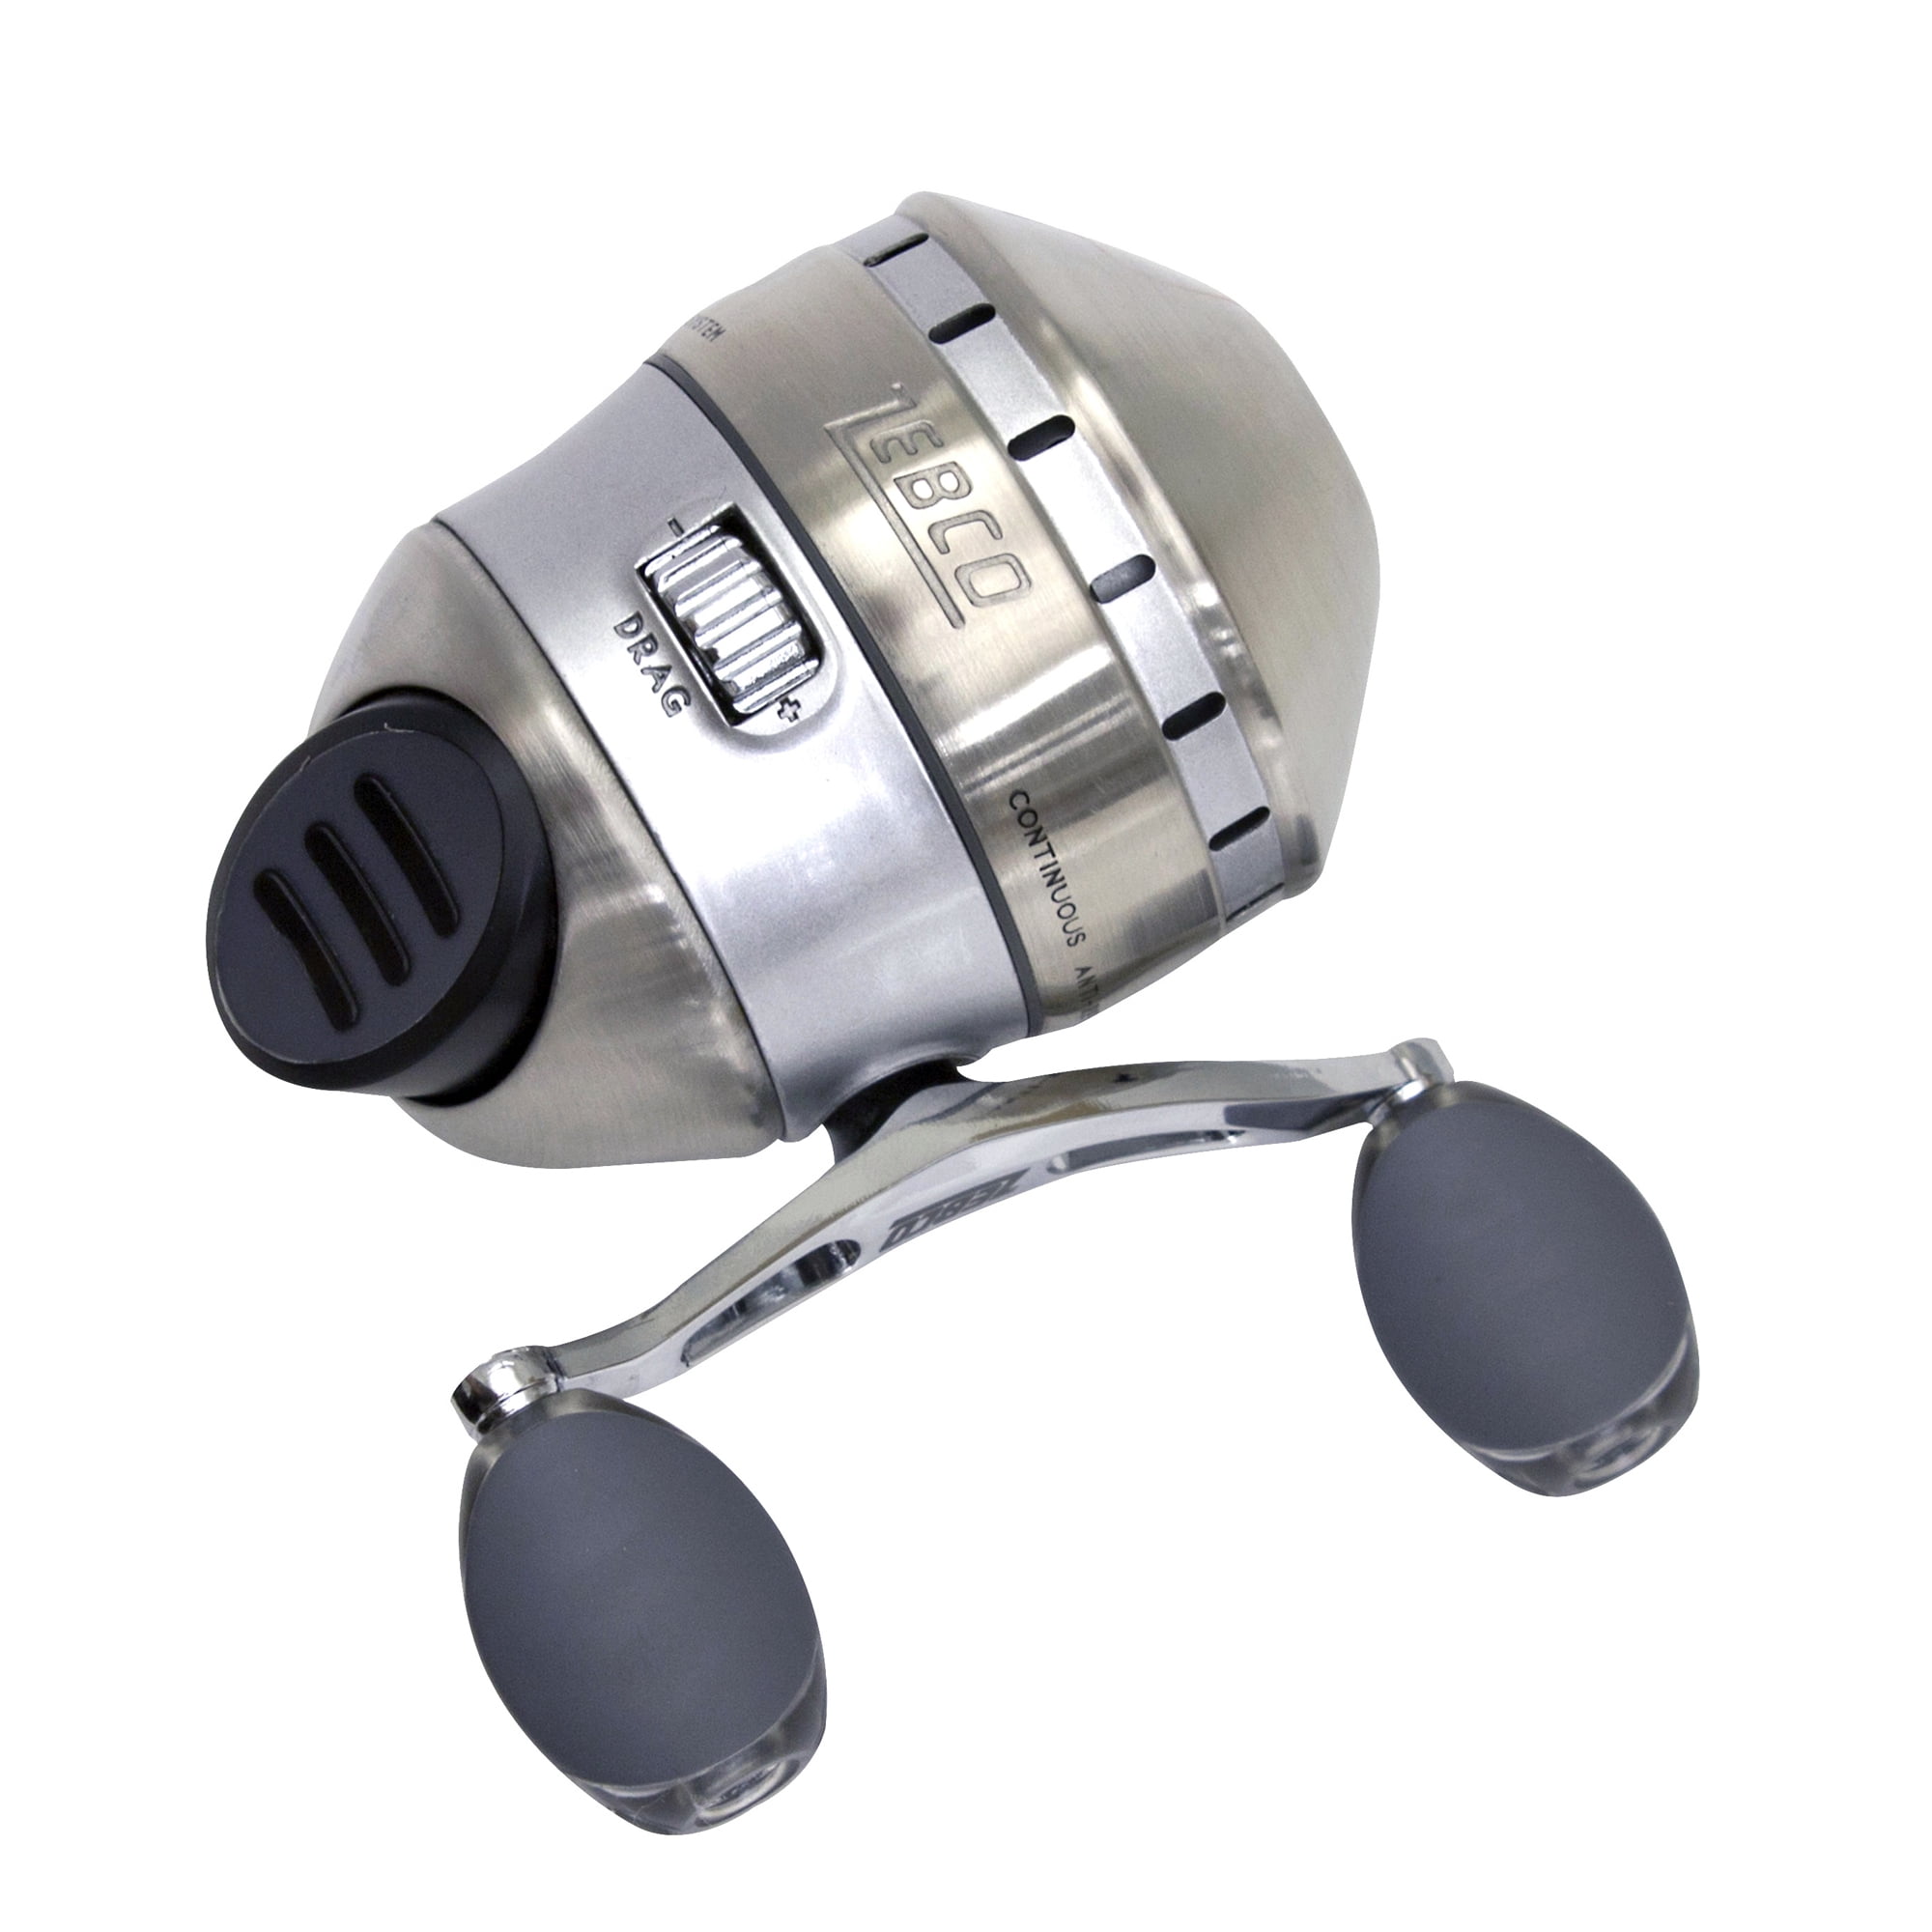 Zebco 33 Platinum 5 Ball Bearing Spincast Reel by Zebco